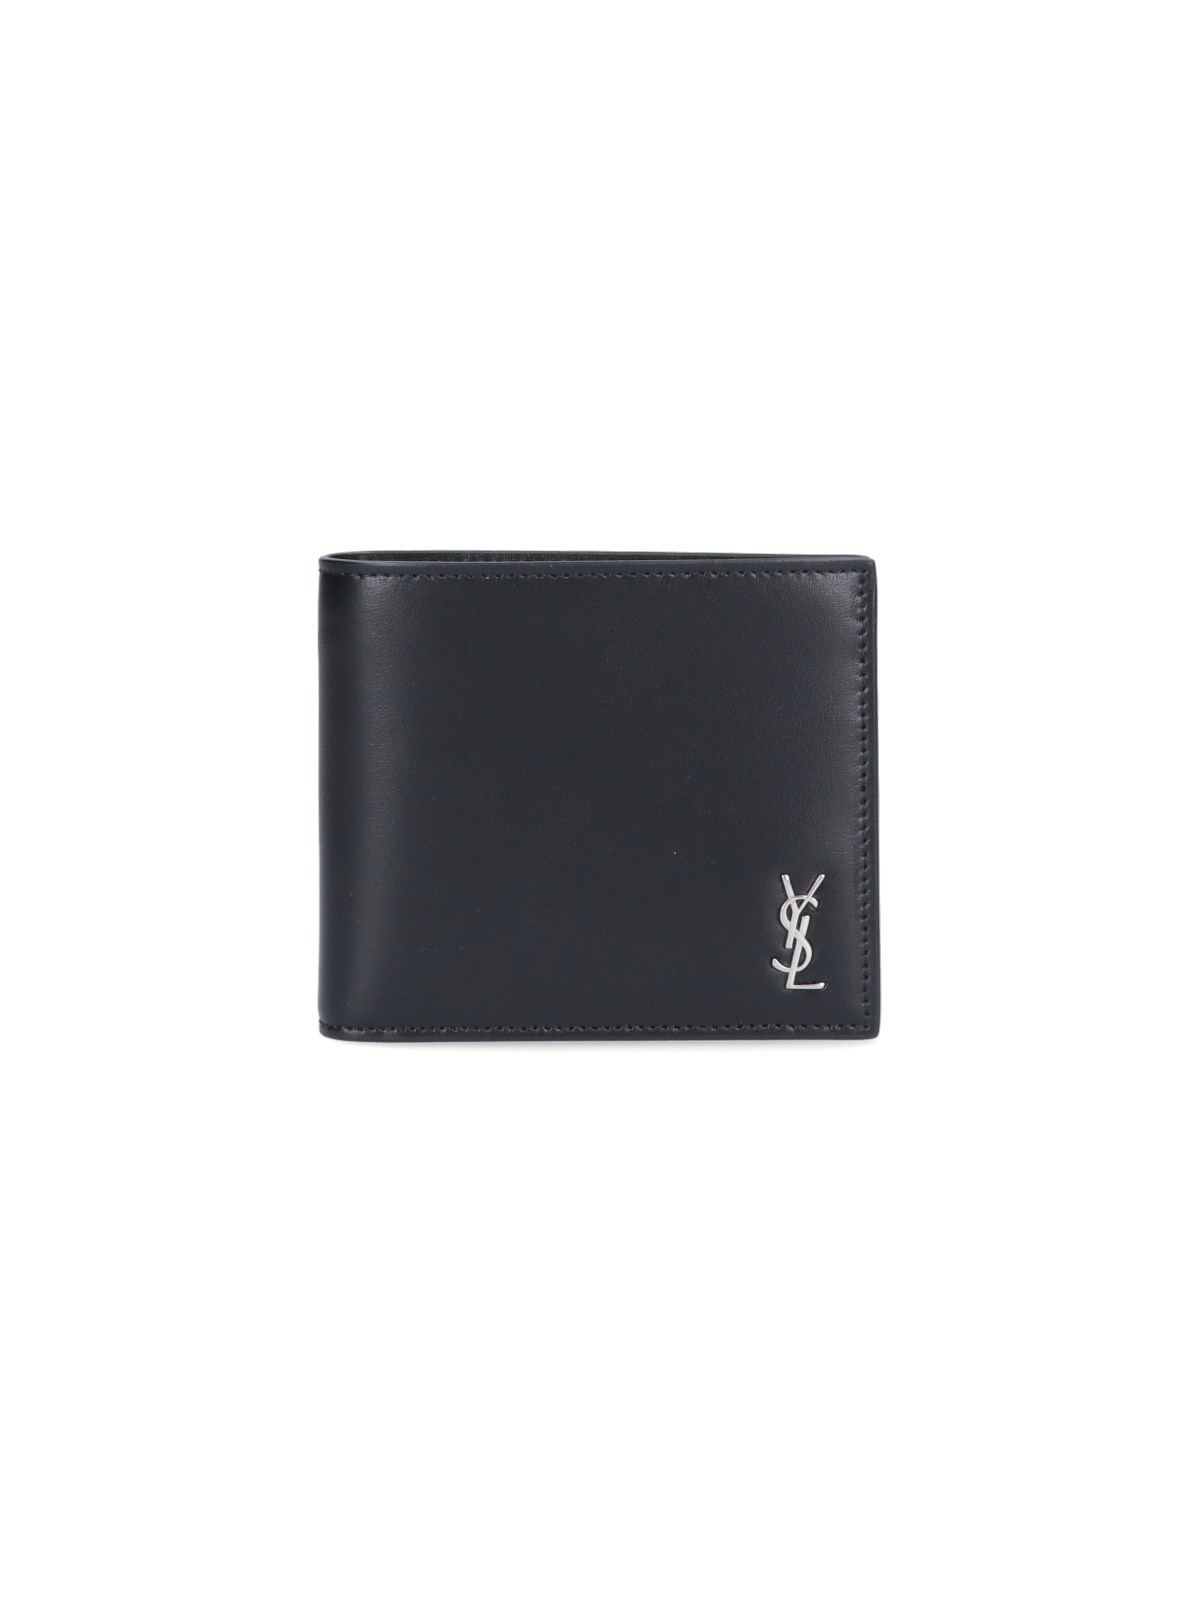 'EAST WEST' WALLET SMALL - 1